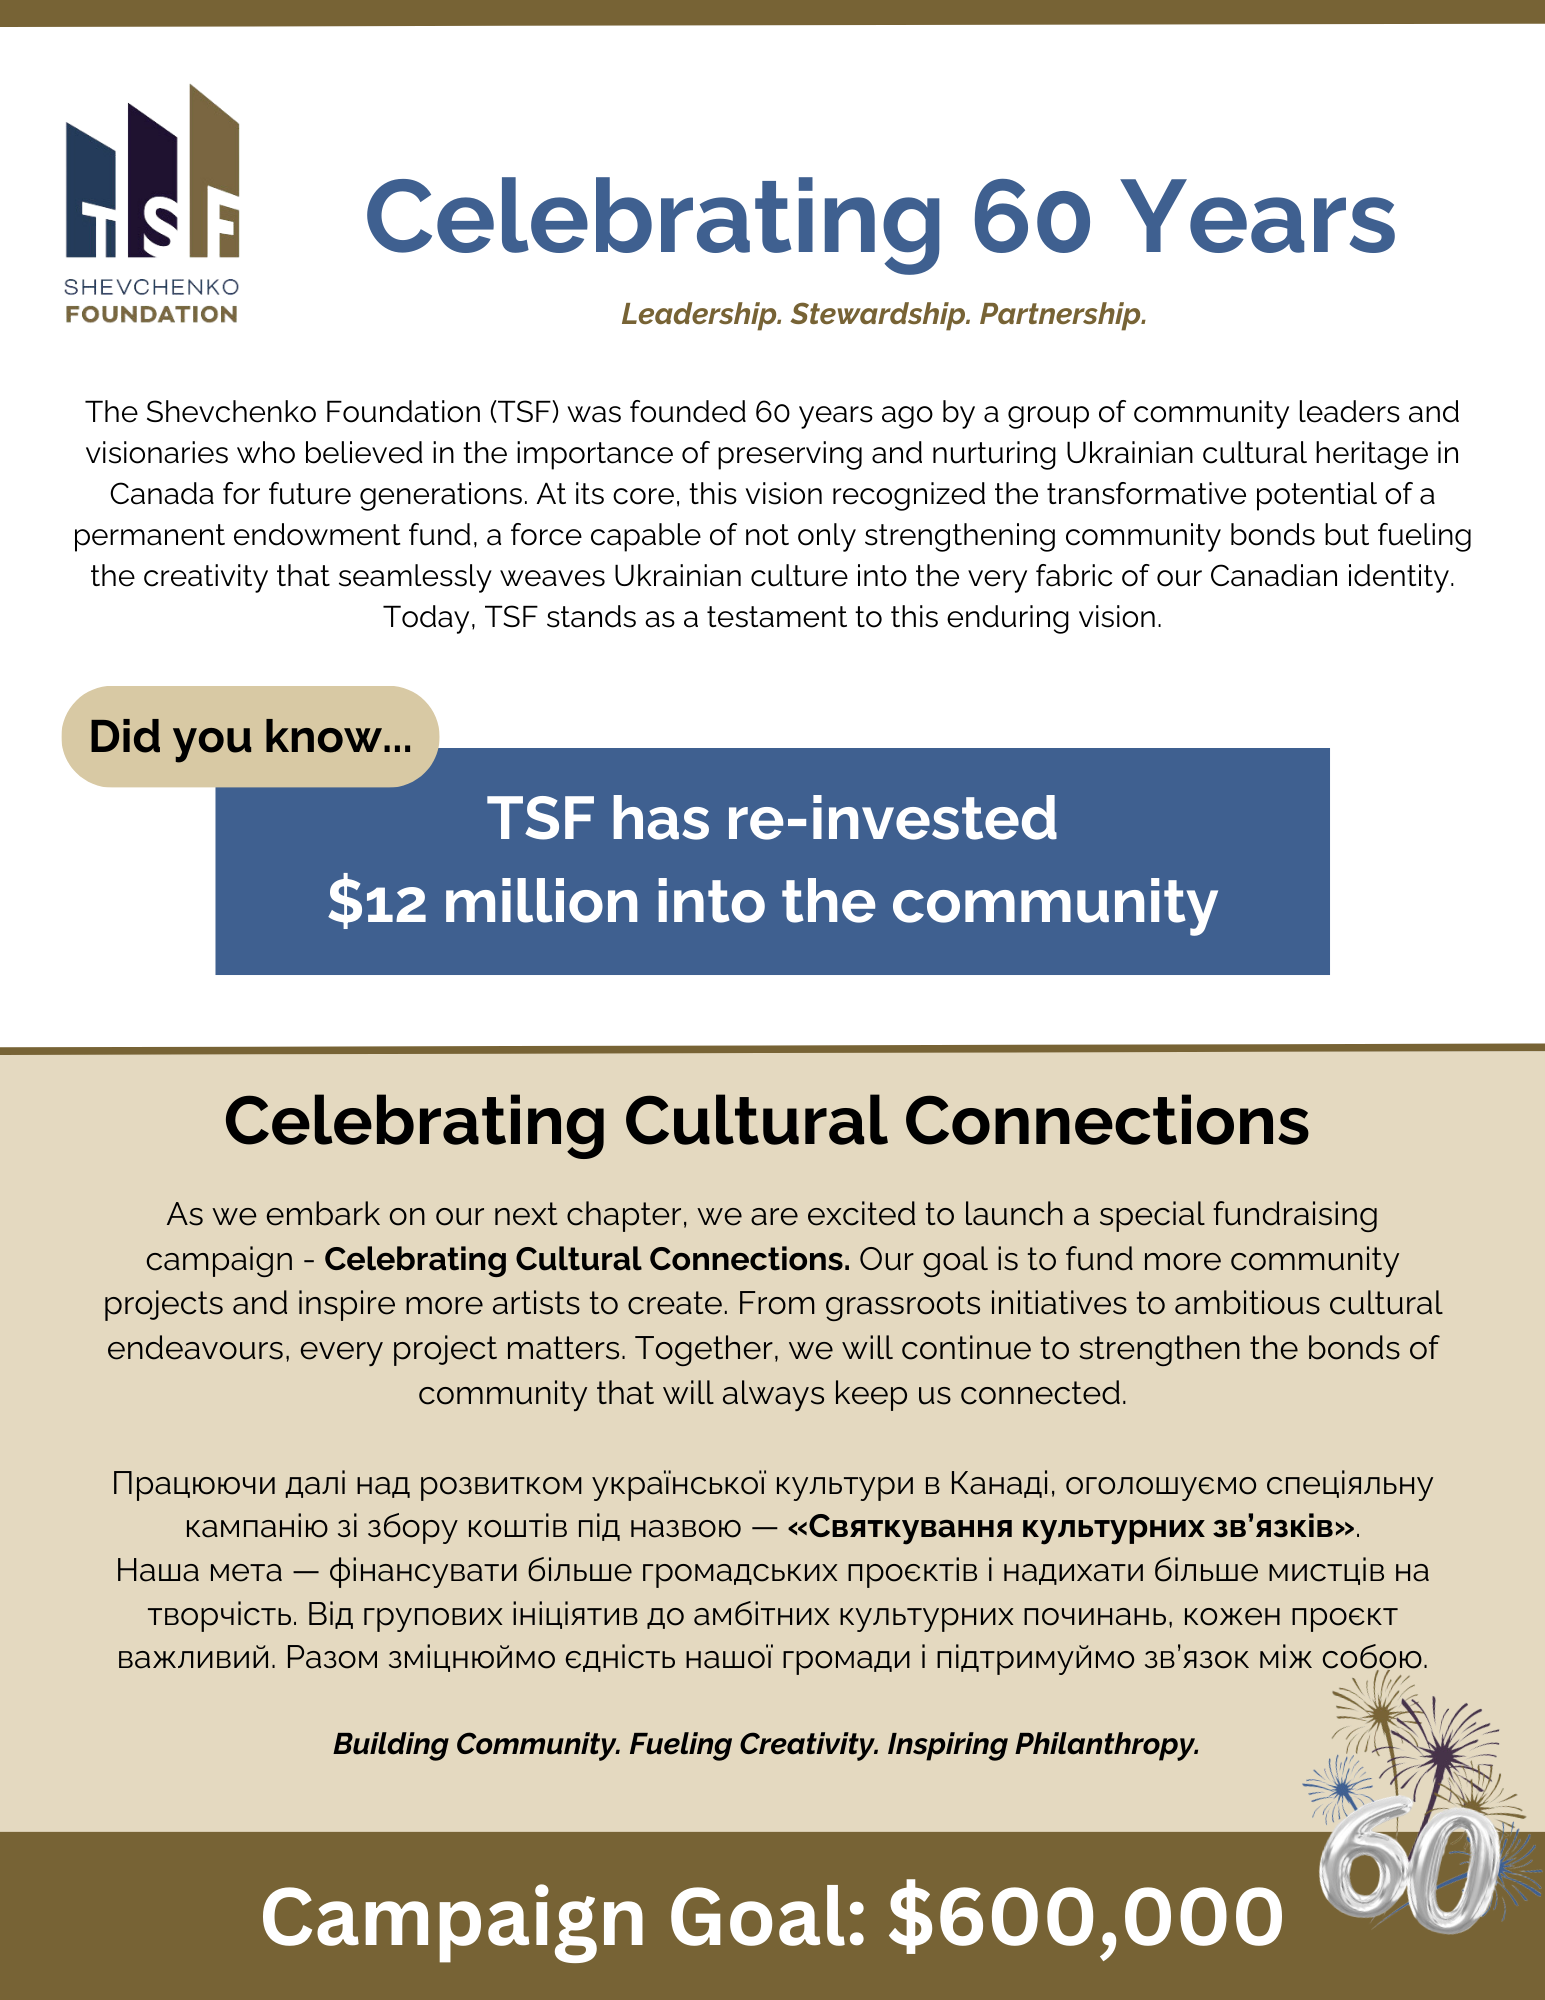 Celebrating Cultural Connections